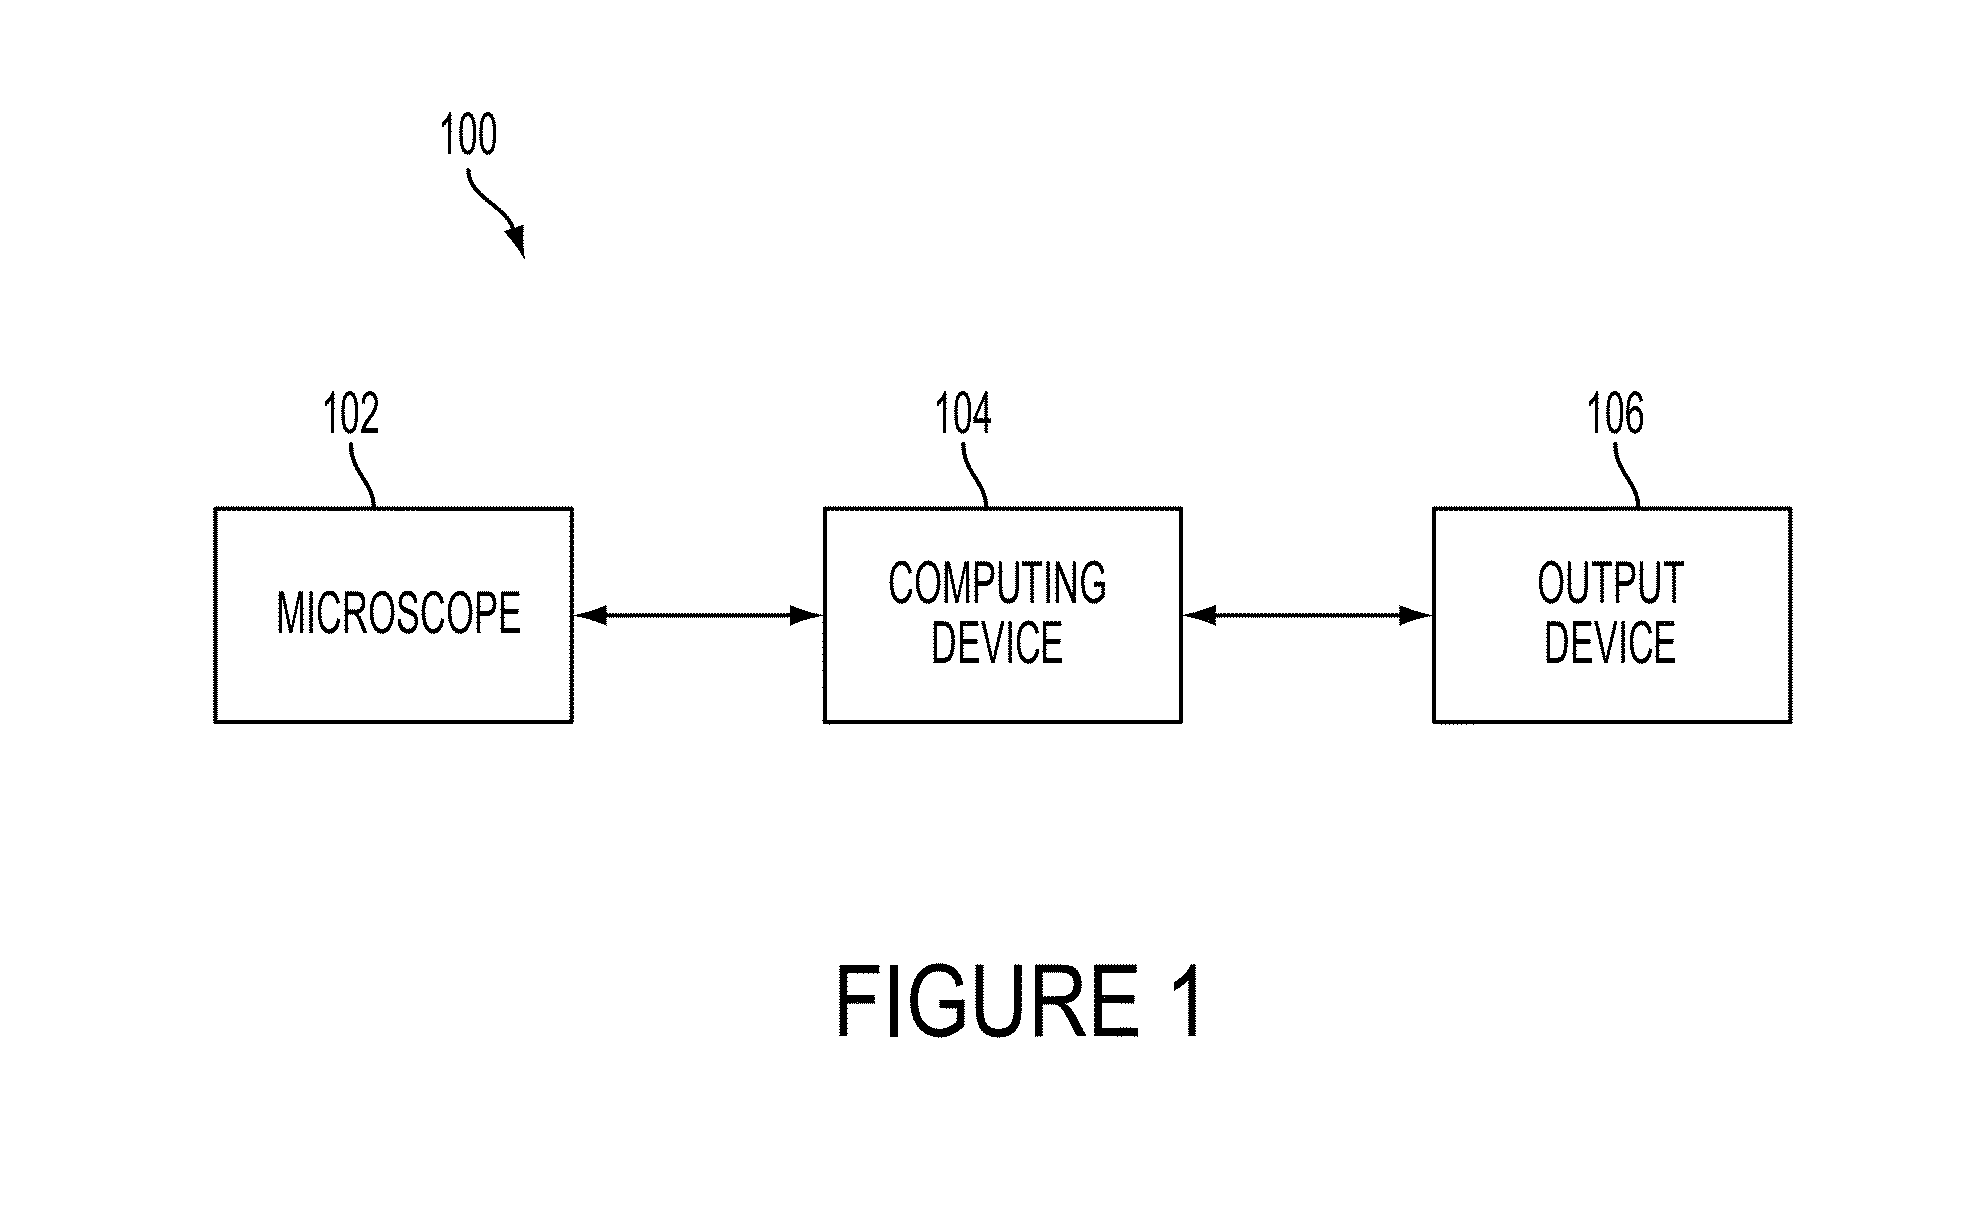 System and device for characterizing cells